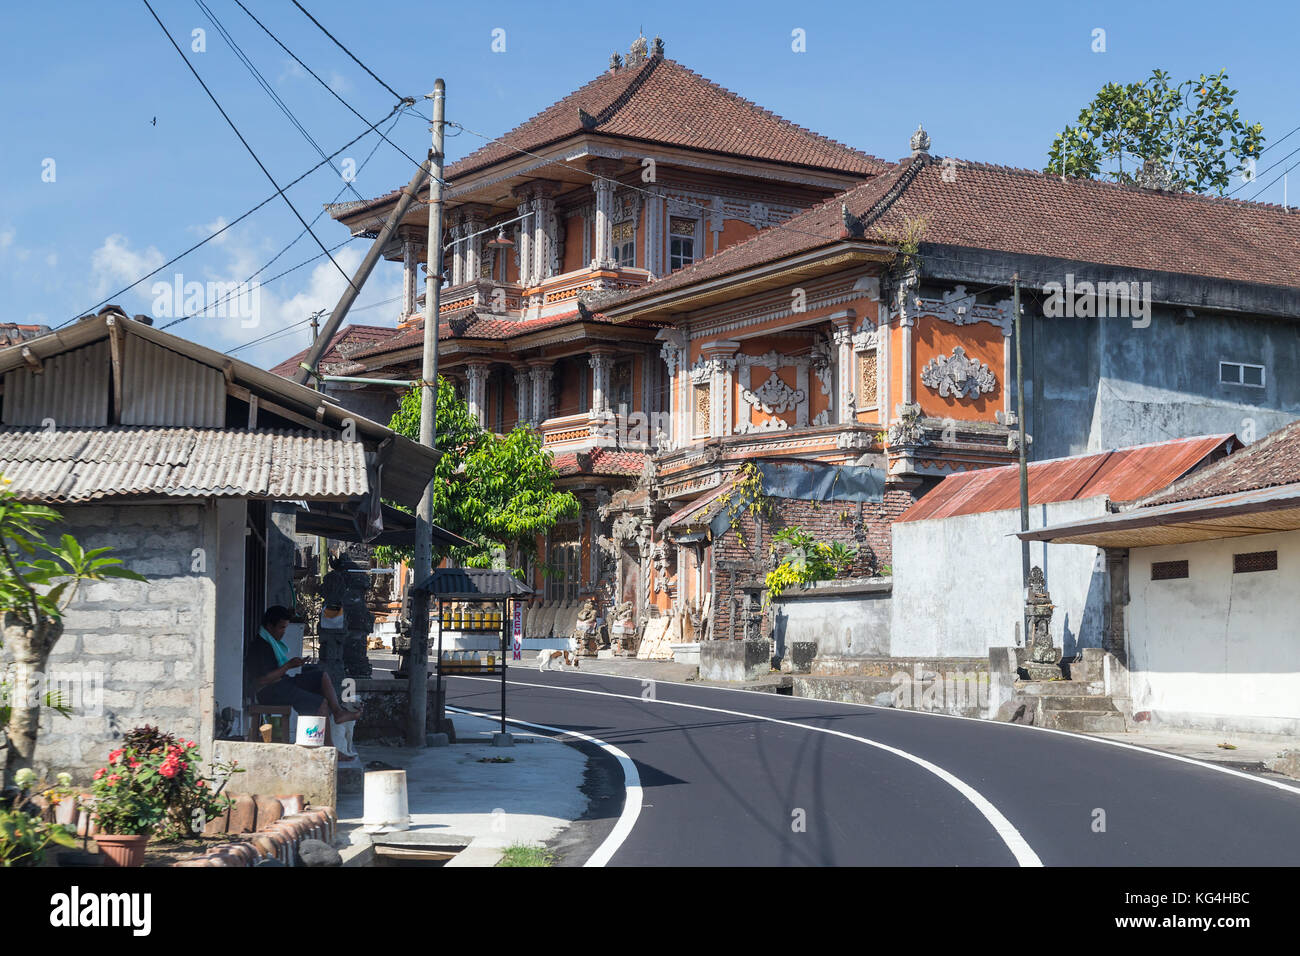 Streets of small towns in Bali, Indonesia Stock Photo